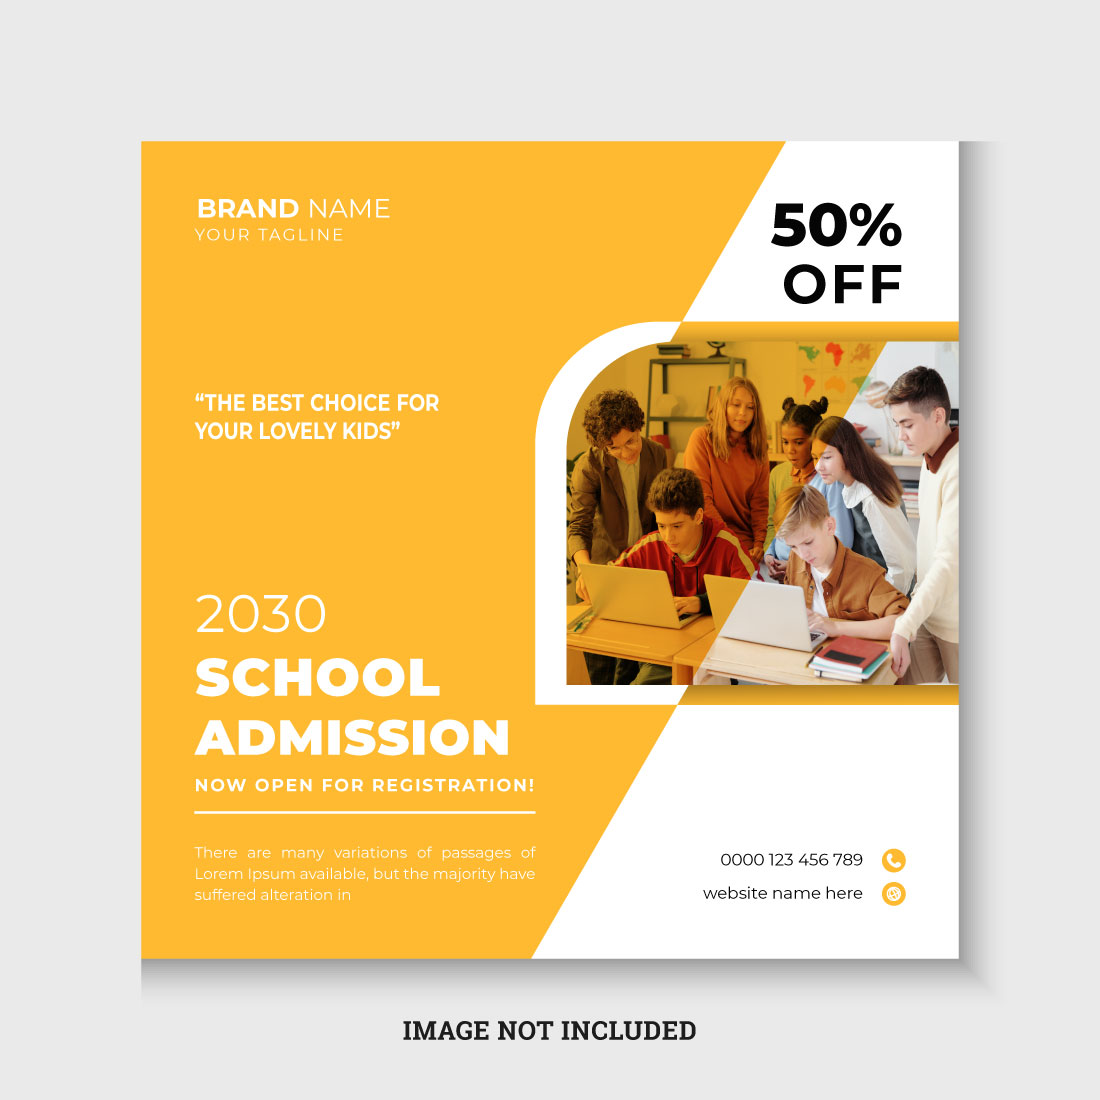 School admission square banner or social media post design template cover image.